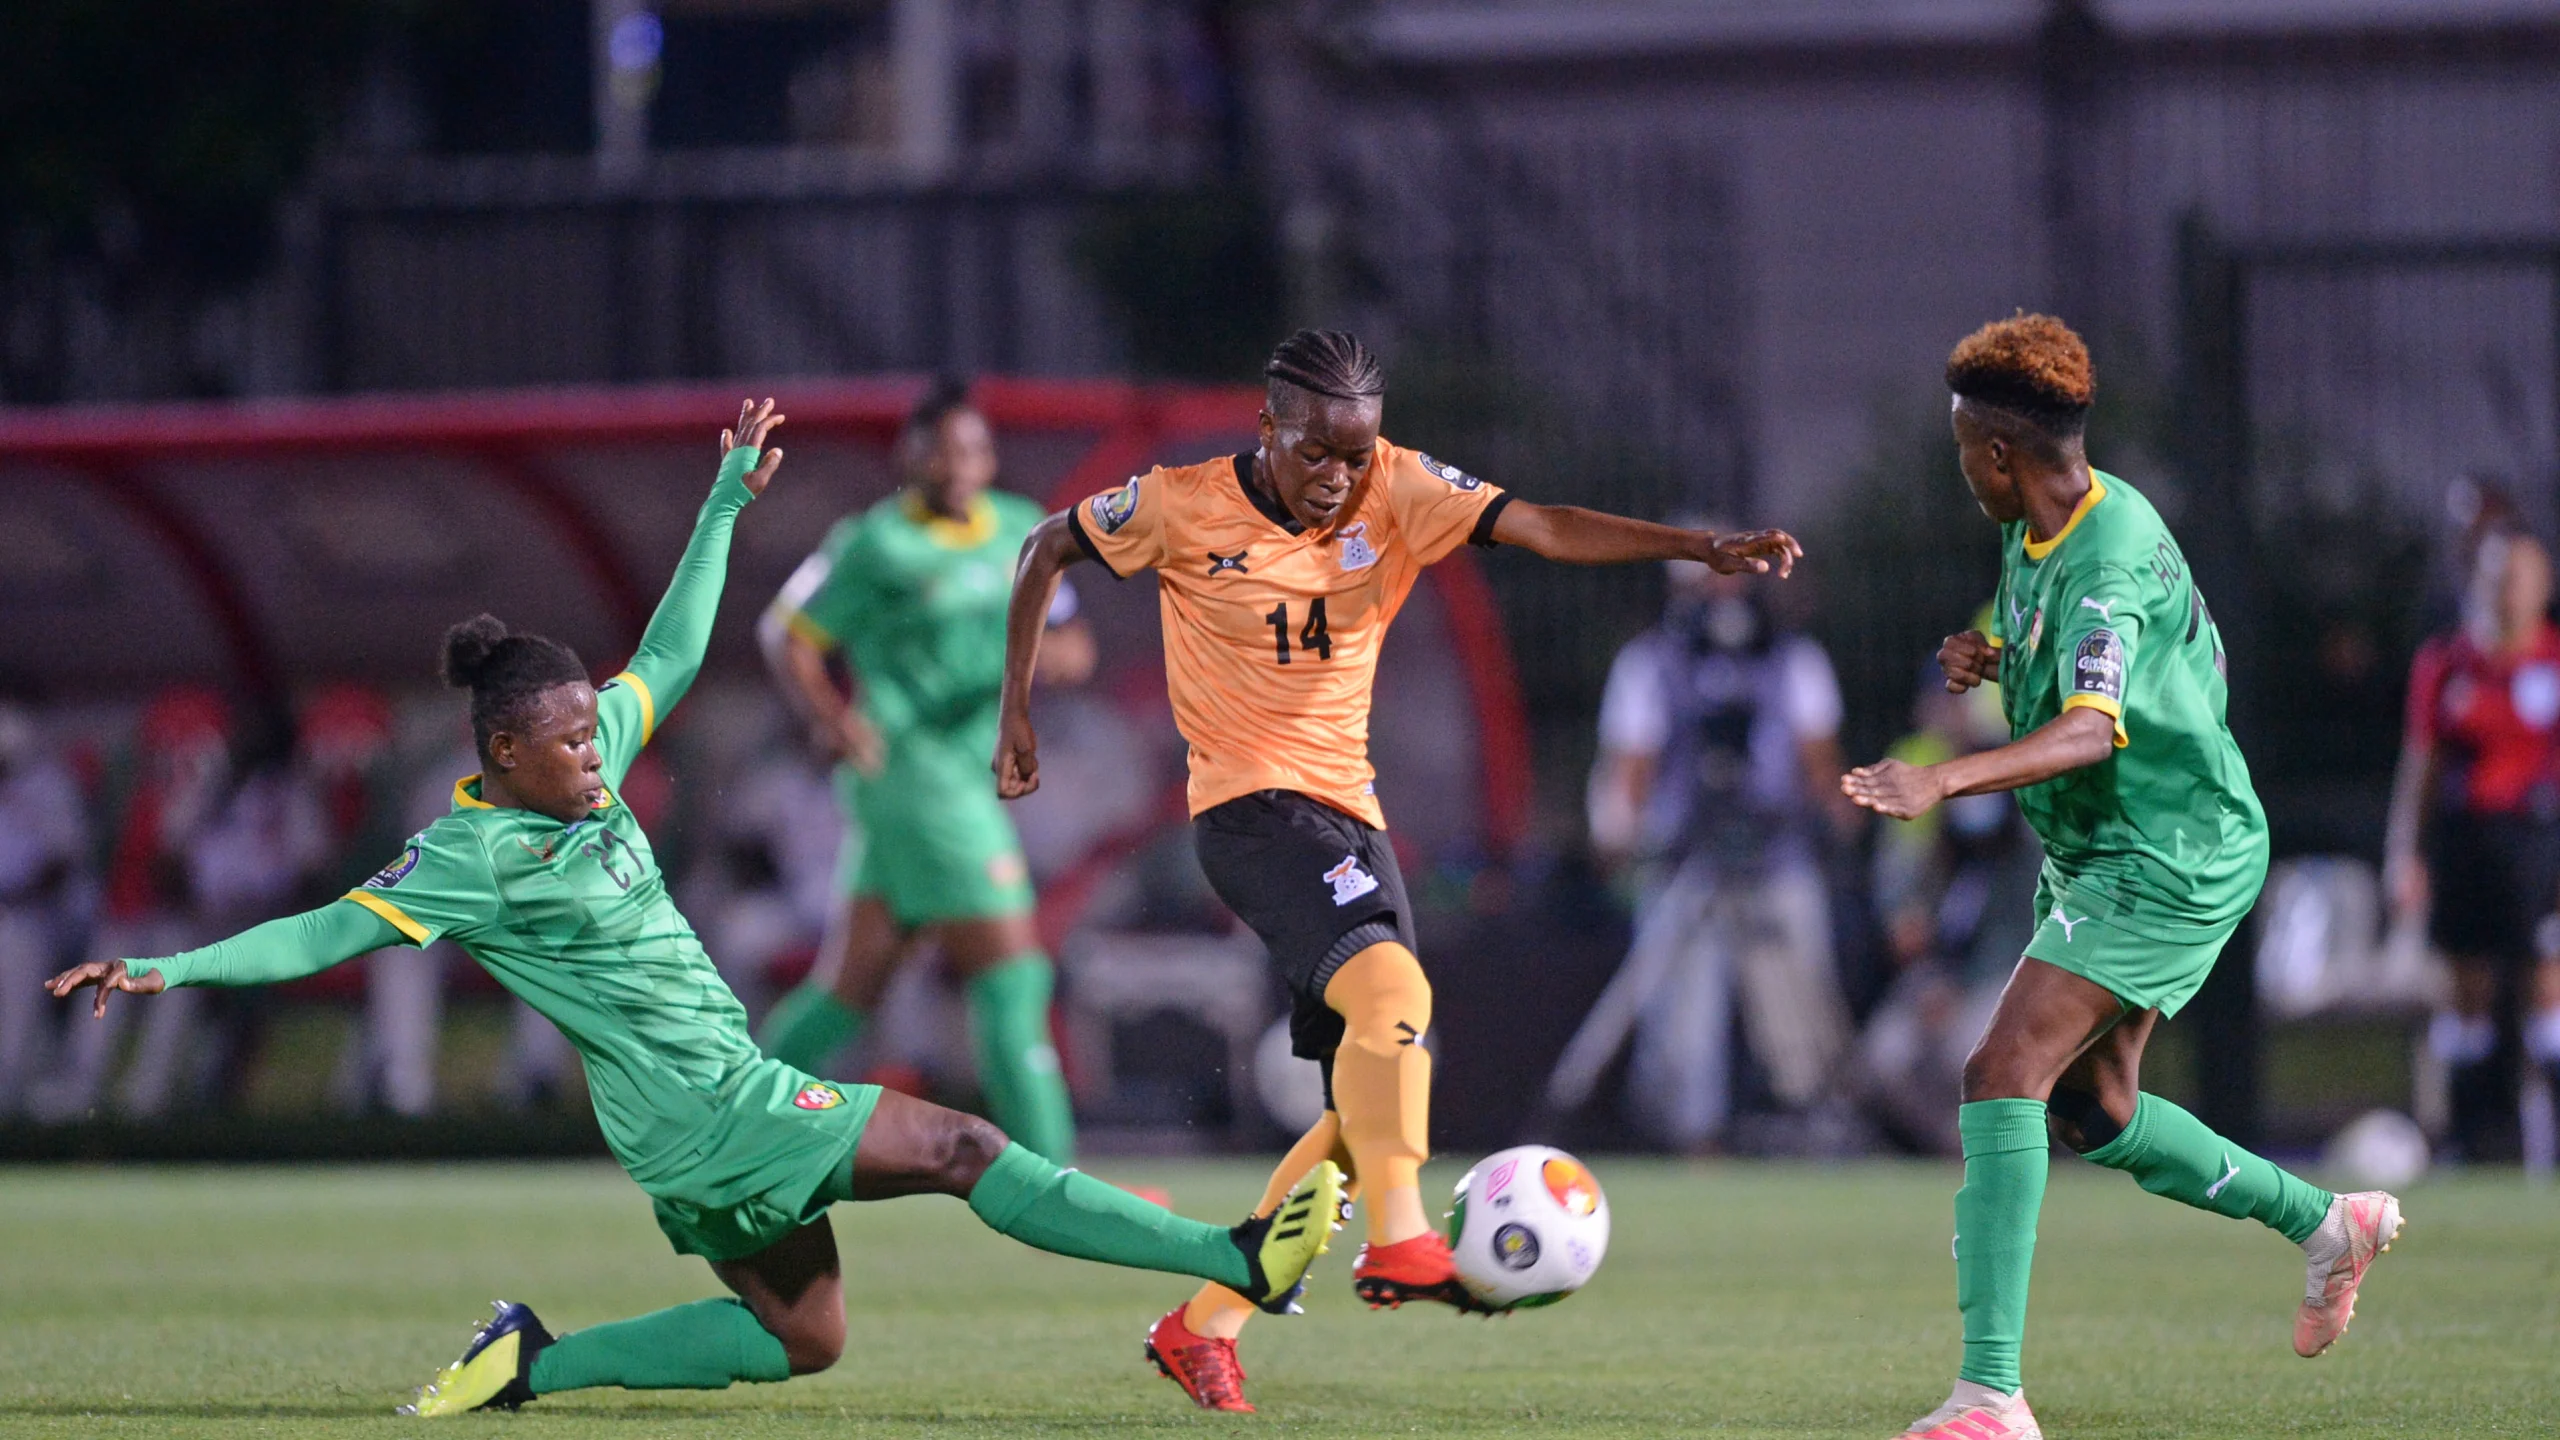 It was a goal-fest as Zambia clinched the win in their last group-stage game